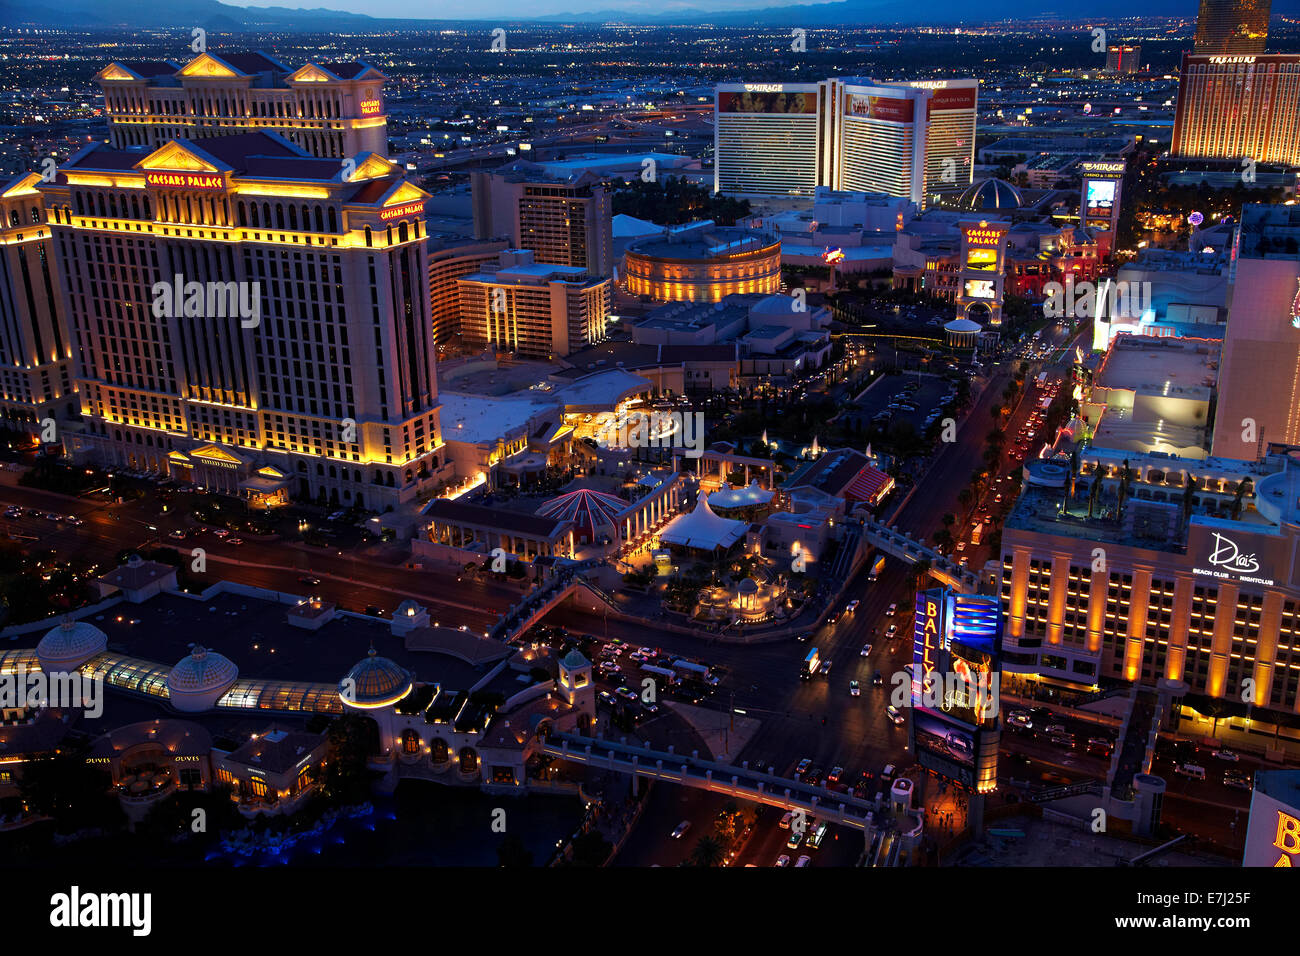 Caesars Palace and The Strip, seen from Eiffel Tower replica at Paris Hotel and Casino, Las Vegas, Nevada, USA Stock Photo